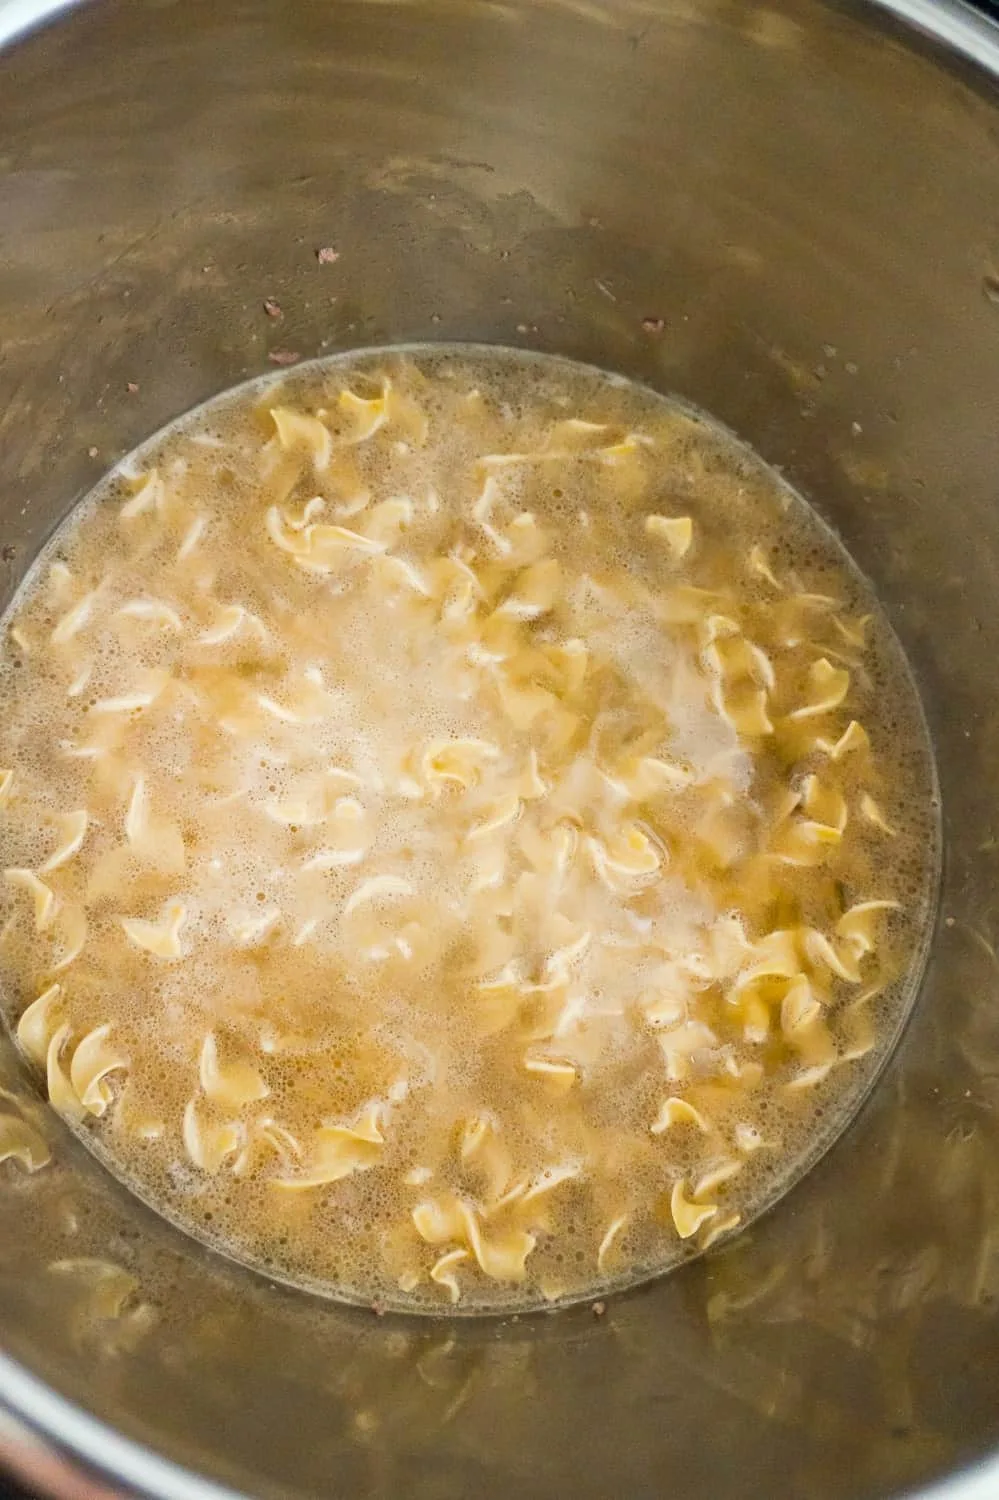 egg noodles submerged in liquid in an Instant Pot